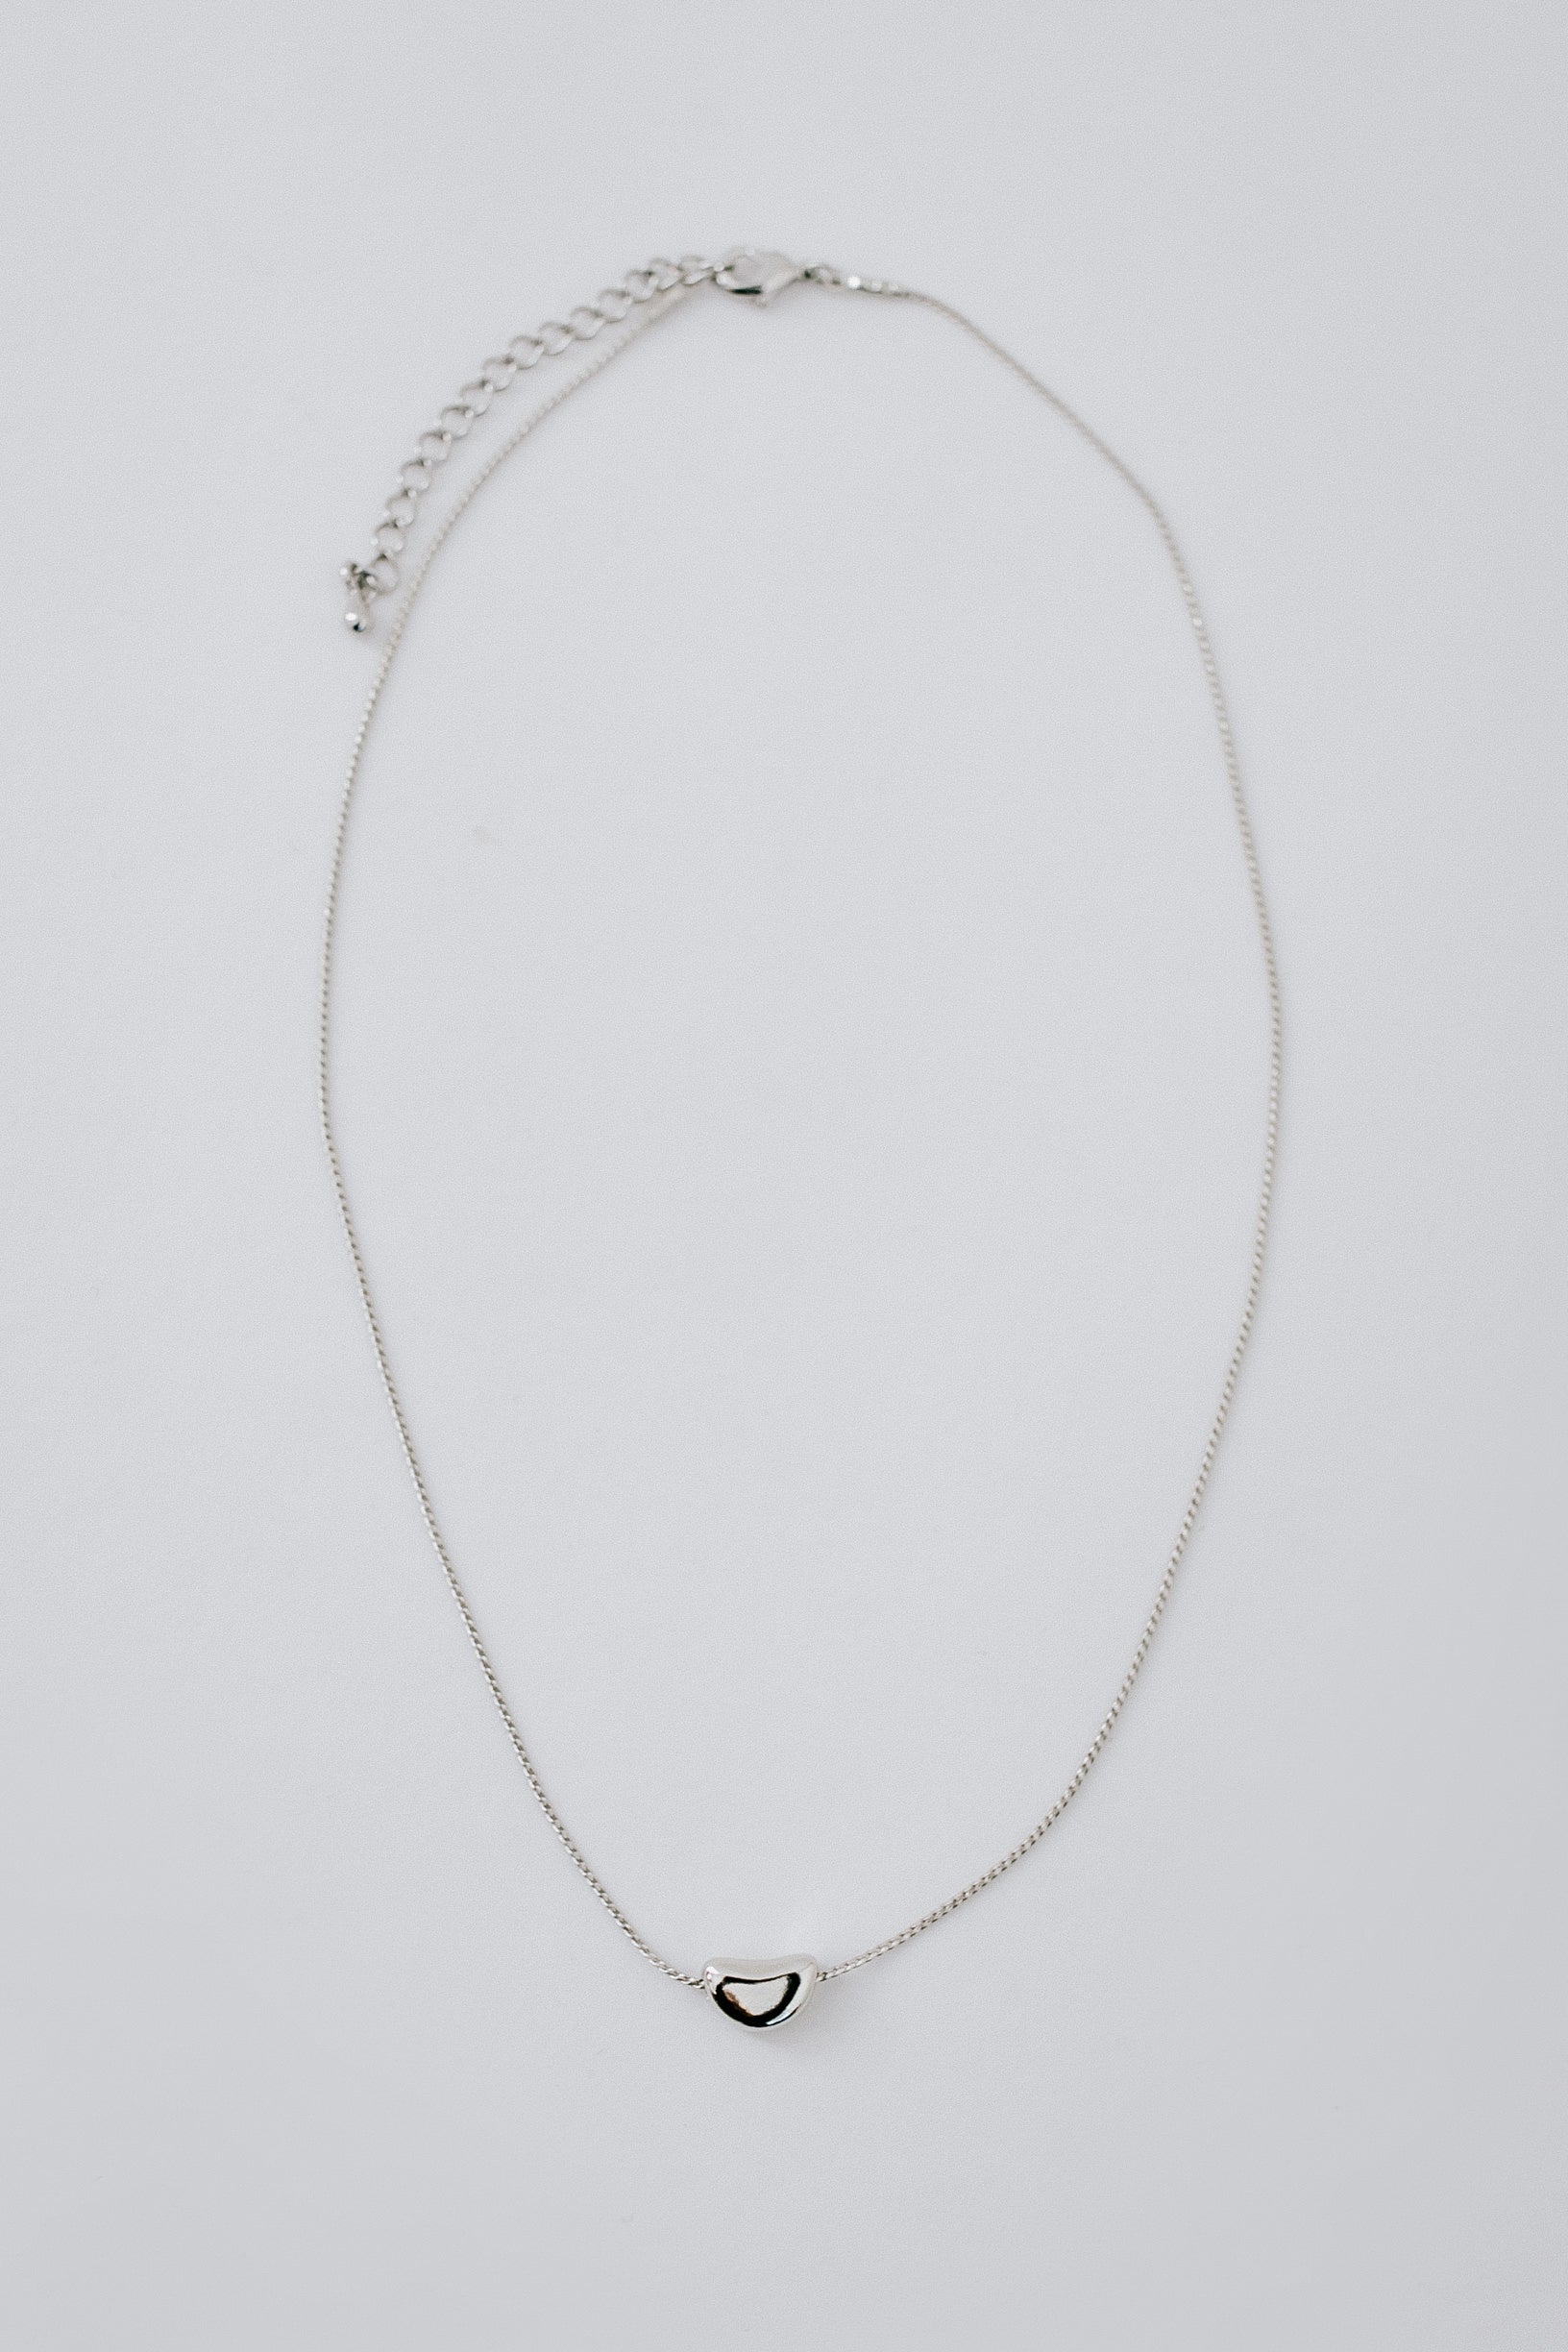 Limitless Crescent Necklace - Silver